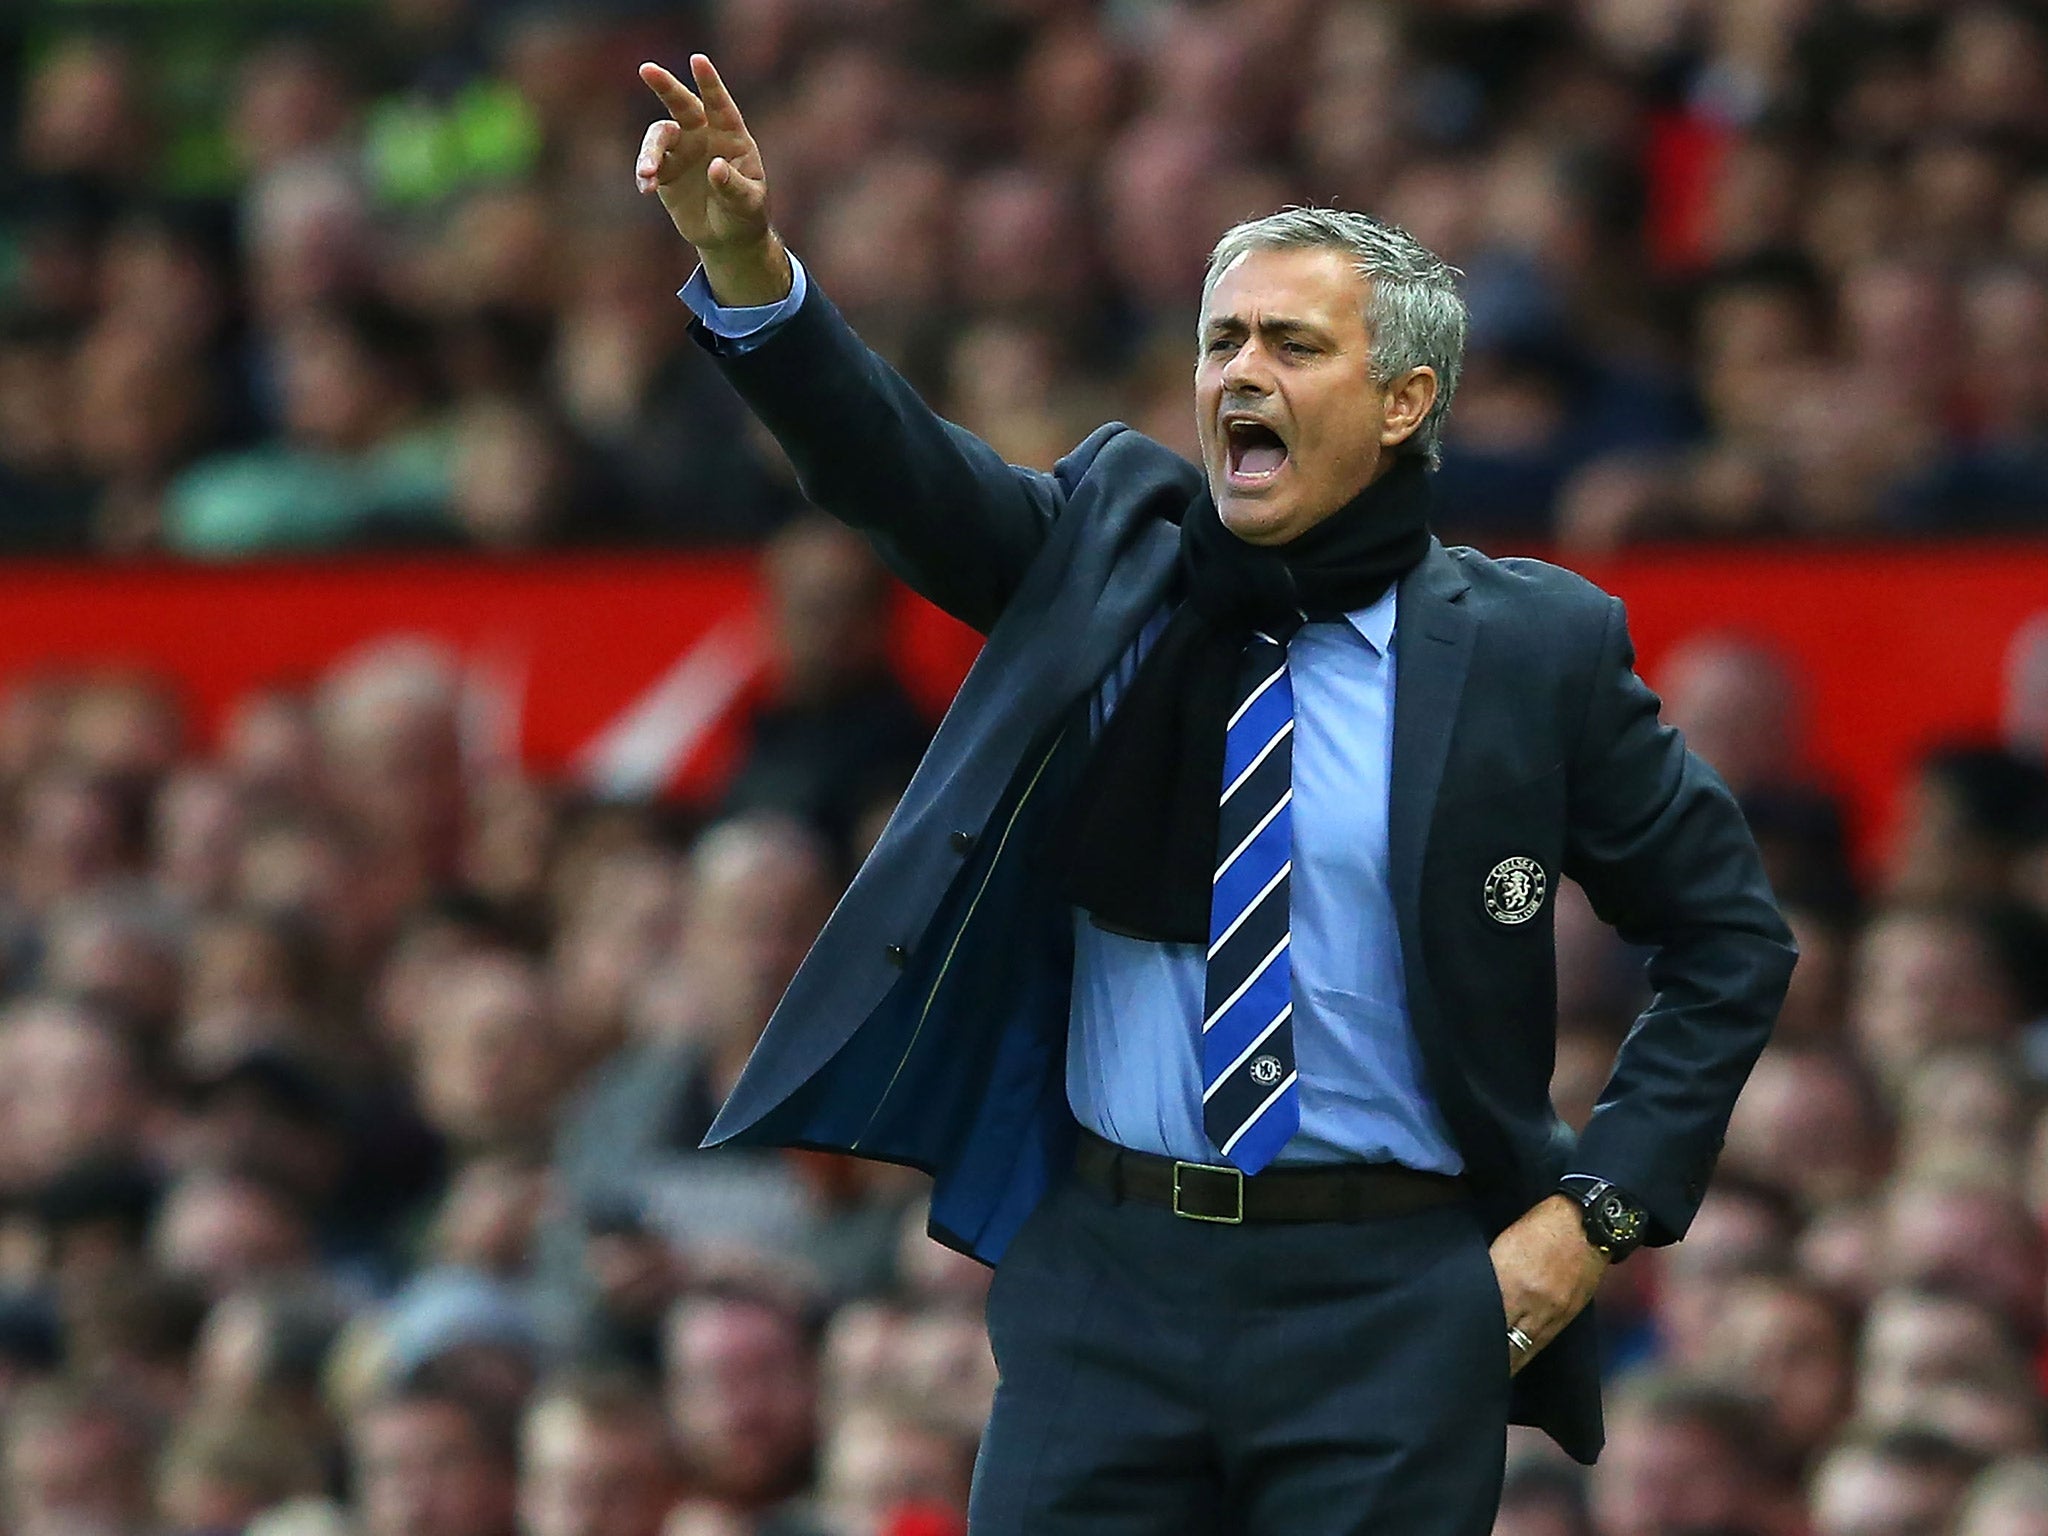 Jose Mourinho is expected to be named Manchester United manager this week